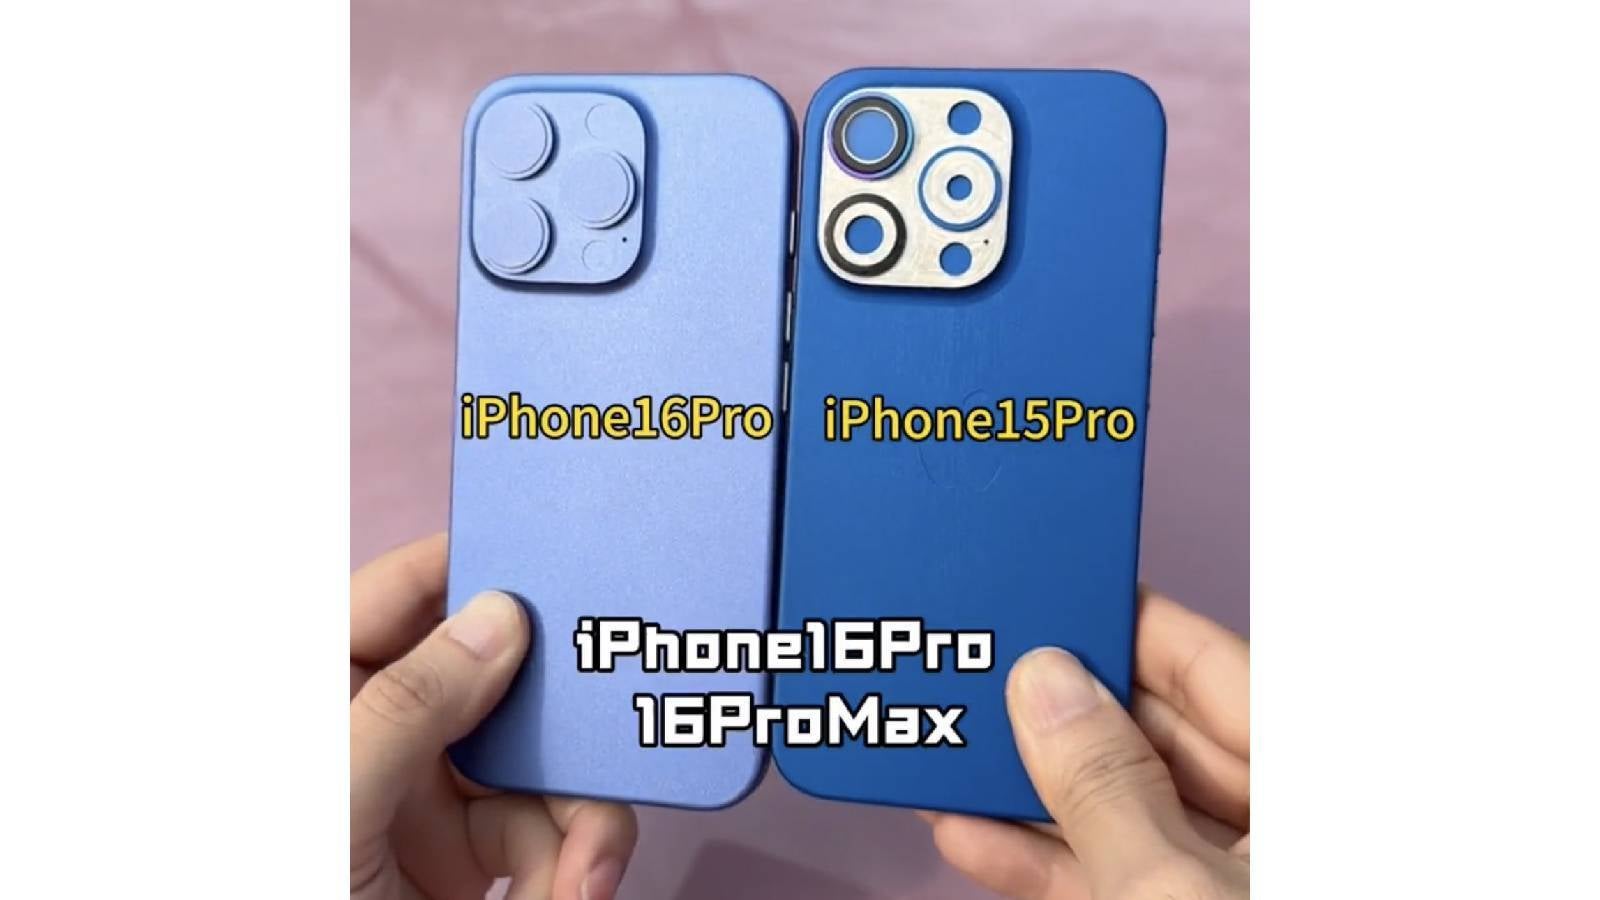 iPhone 16 Pro expected to be bigger than iPhone 15 Pro - Few iPhone 16 surprises left as images of dummy units, cases and new color variants leaked